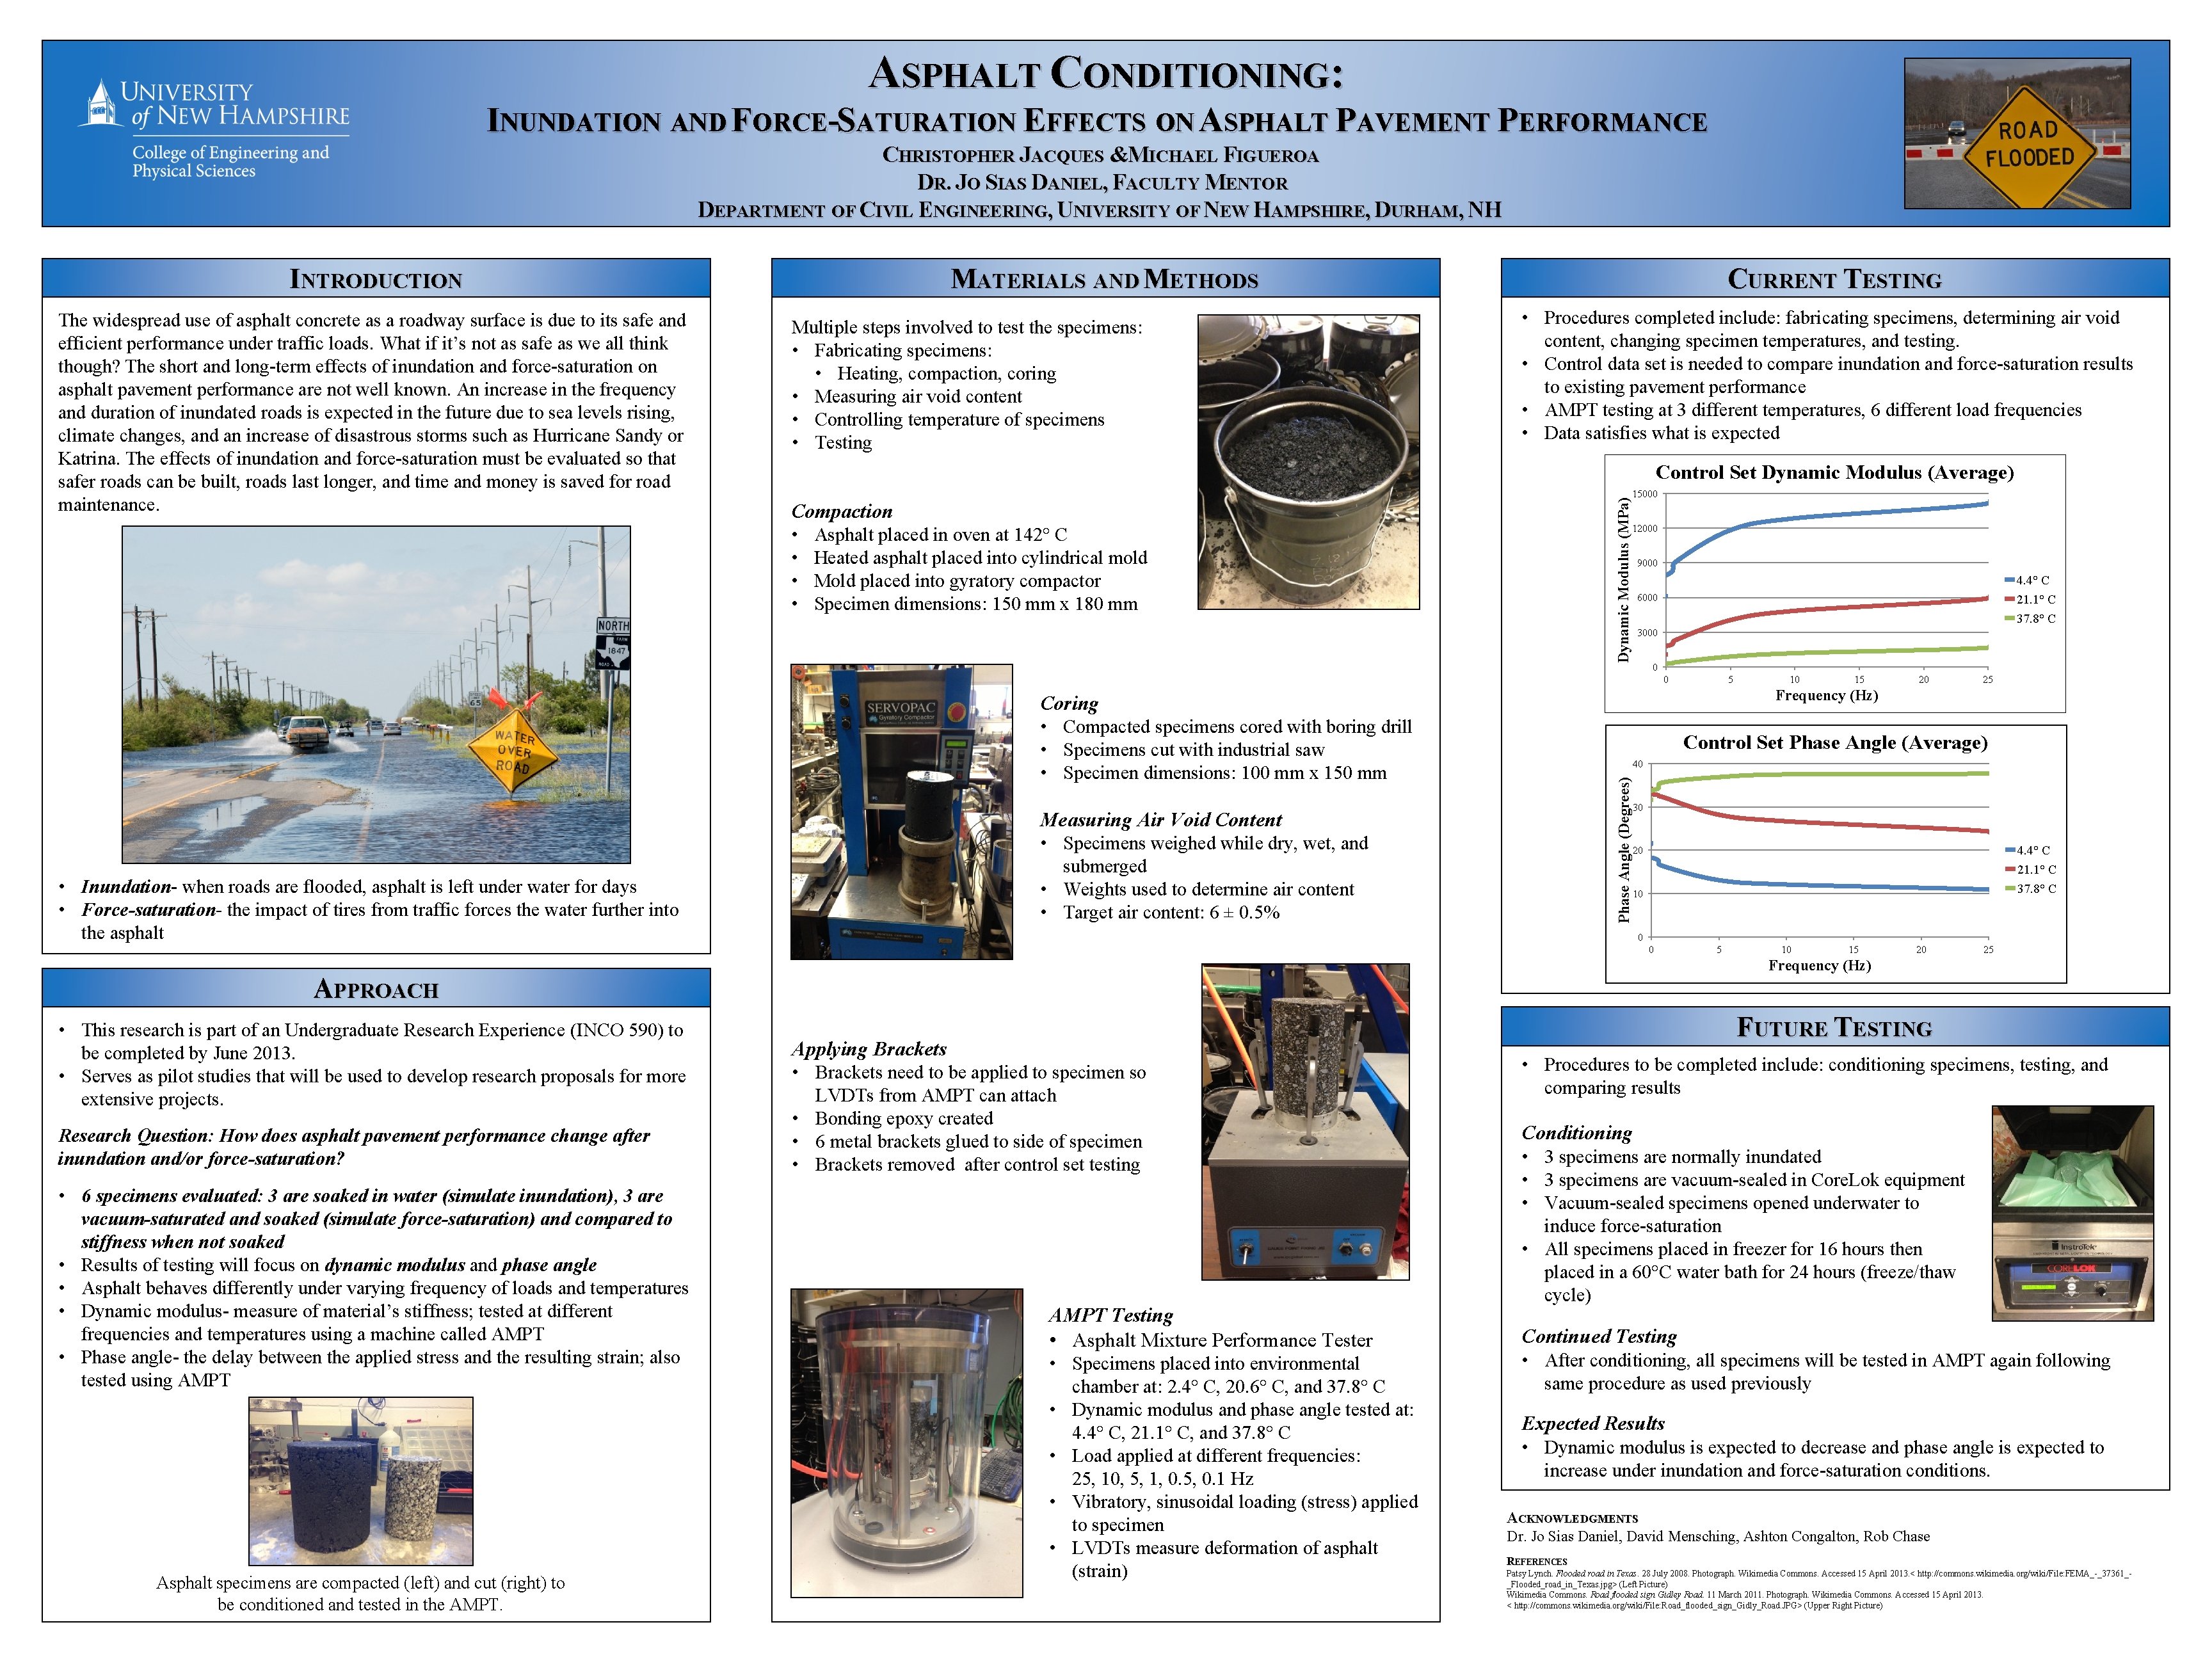 ASPHALT CONDITIONING: INUNDATION AND FORCE-SATURATION EFFECTS ON ASPHALT PAVEMENT PERFORMANCE CHRISTOPHER JACQUES &MICHAEL FIGUEROA